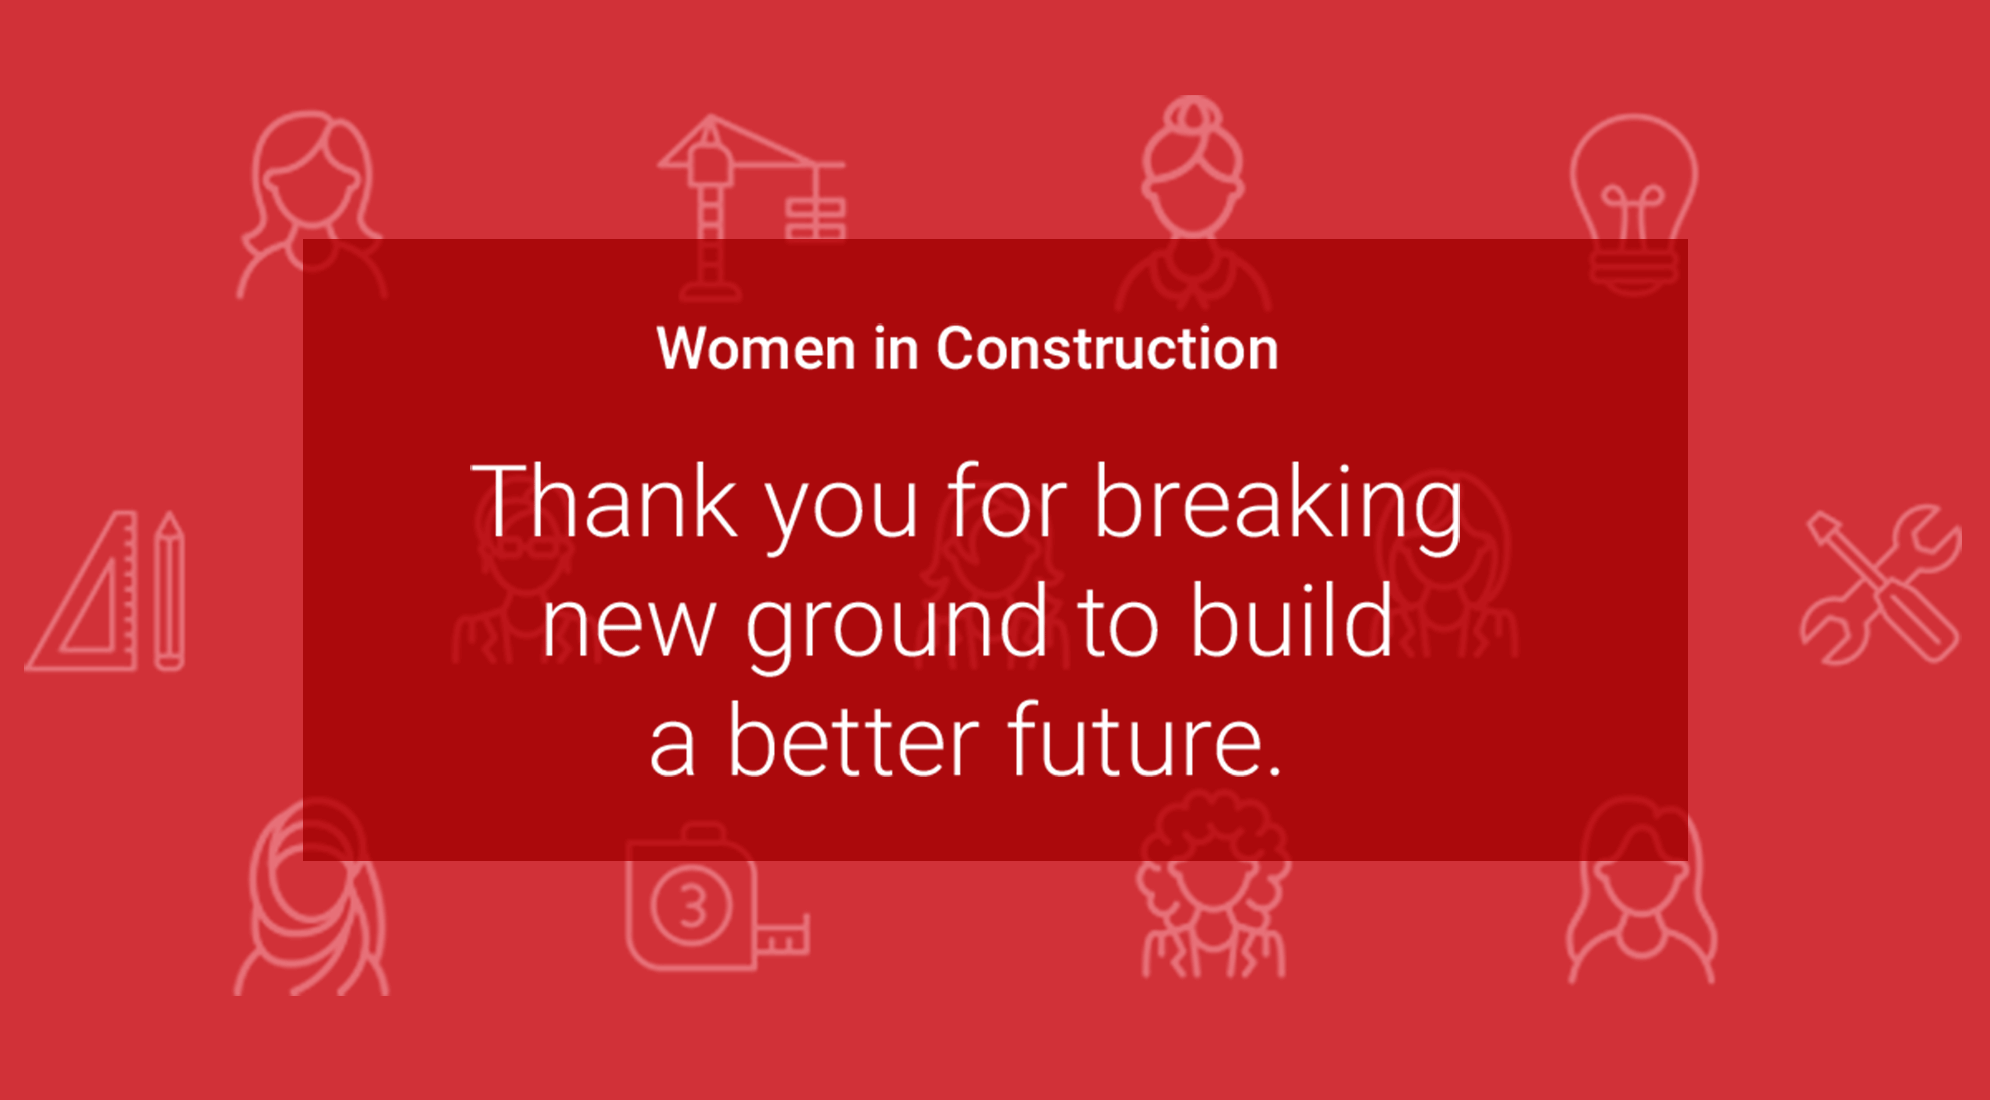 Women in Construction: Building a Better Future